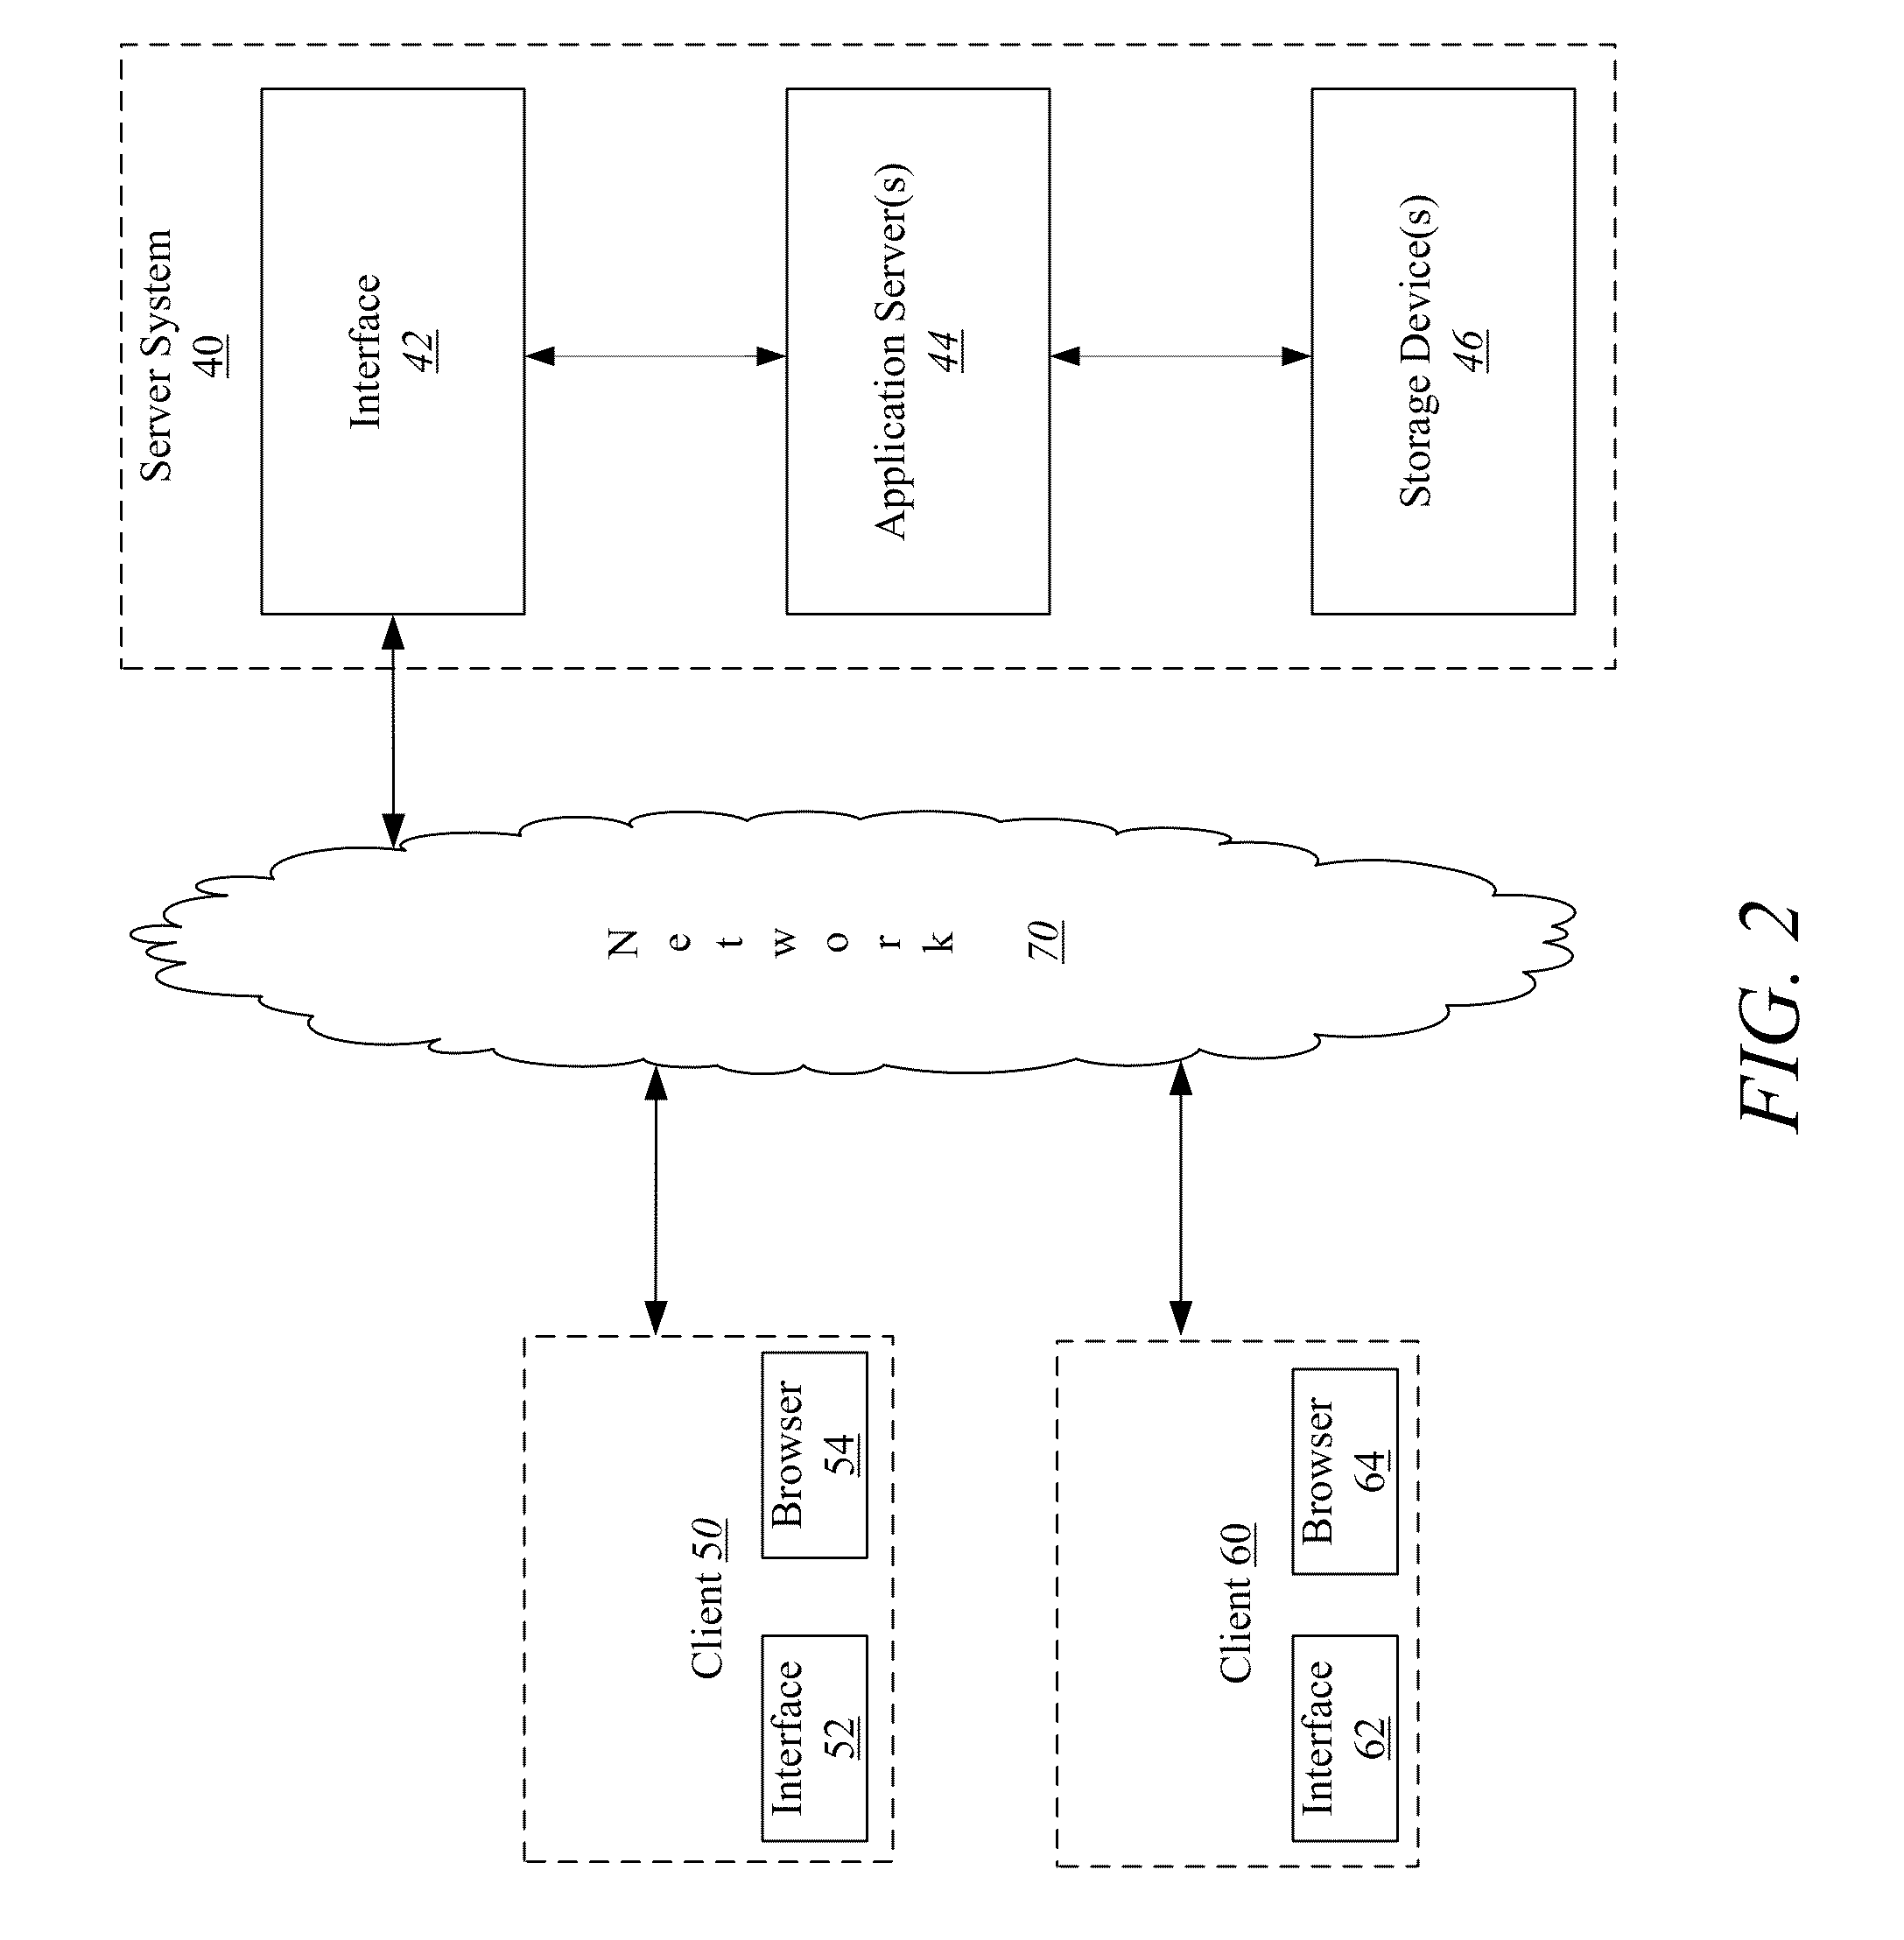 Systems and methods for dynamically generating graphical memorabilia projects for presentation and use